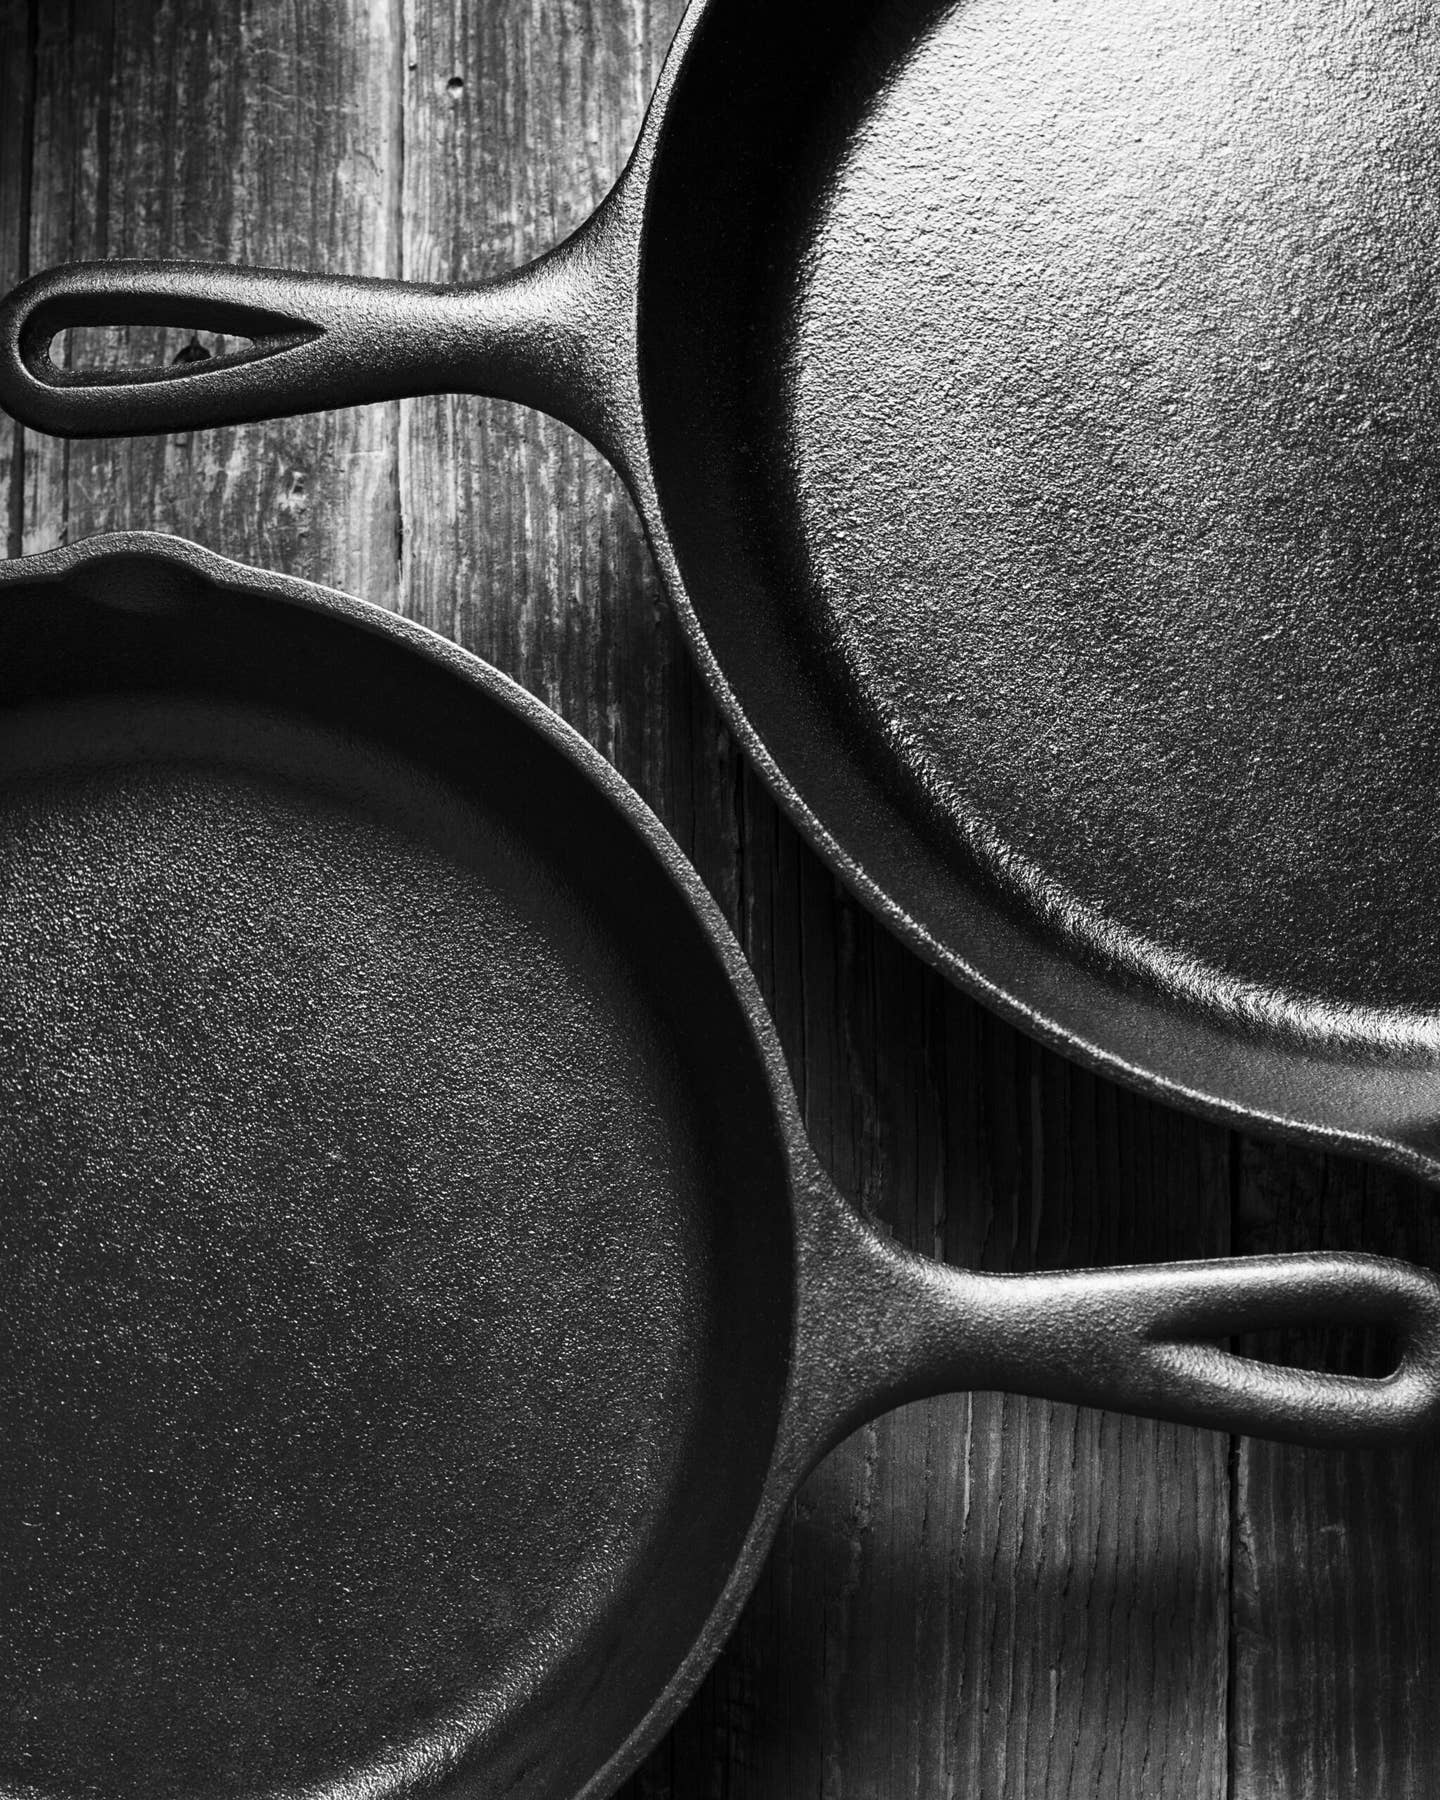 How to Clean and Care for Cast Iron Pans